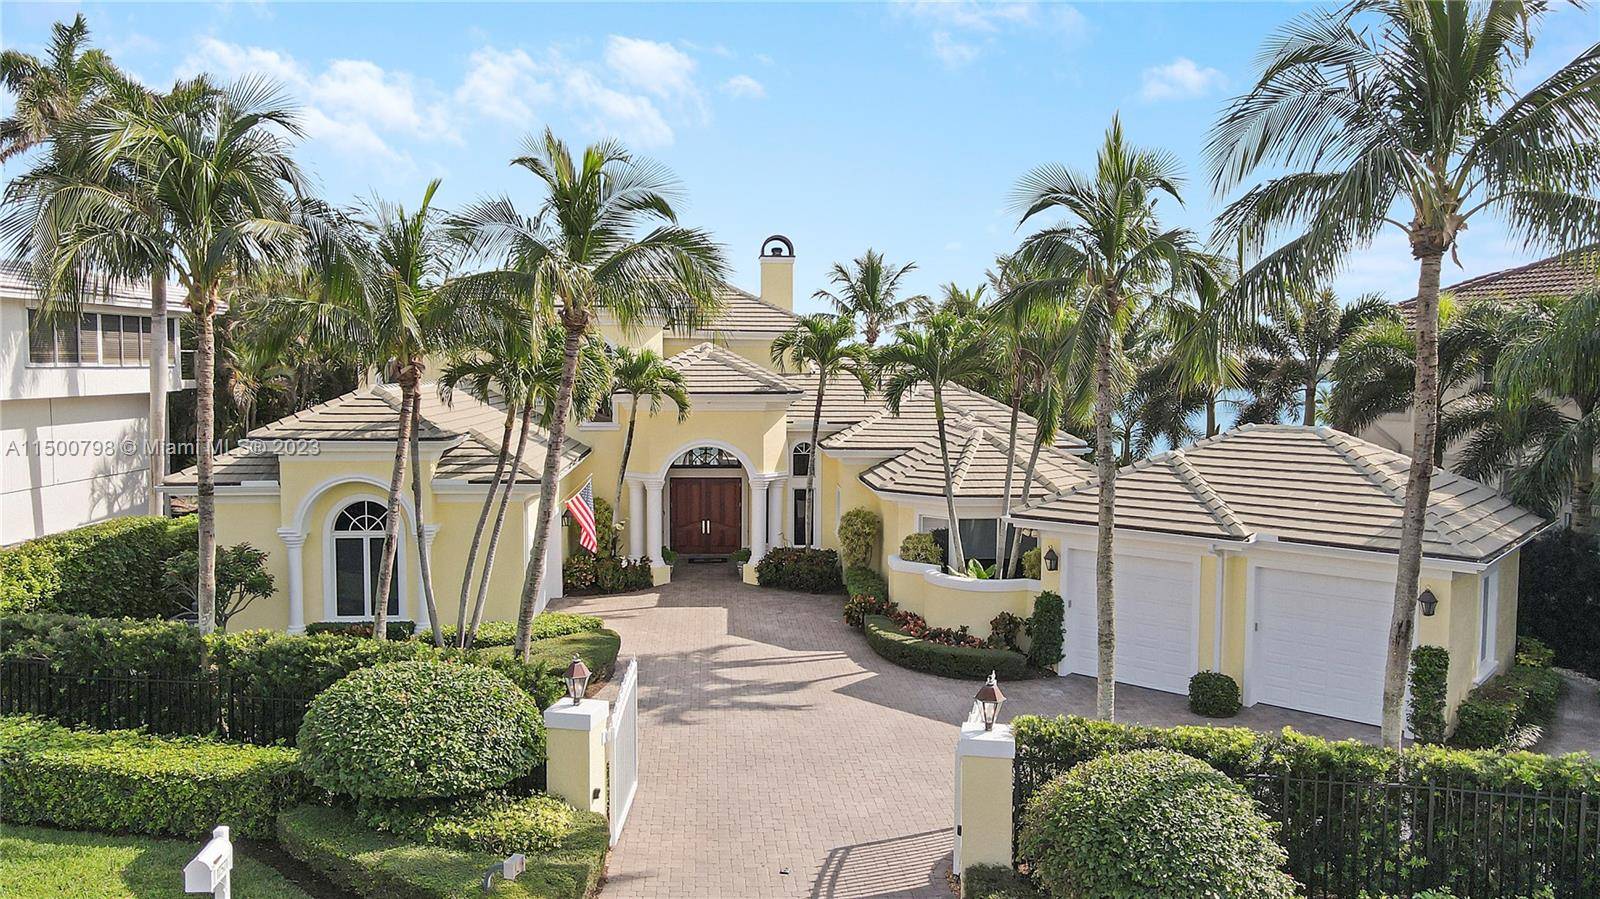 This Spectacular Direct Intracoastal Home located in Prestigious Indian Hills is sure to please the most discerning buyer looking for perfection and luxury living on the water in Tequesta Martin ...